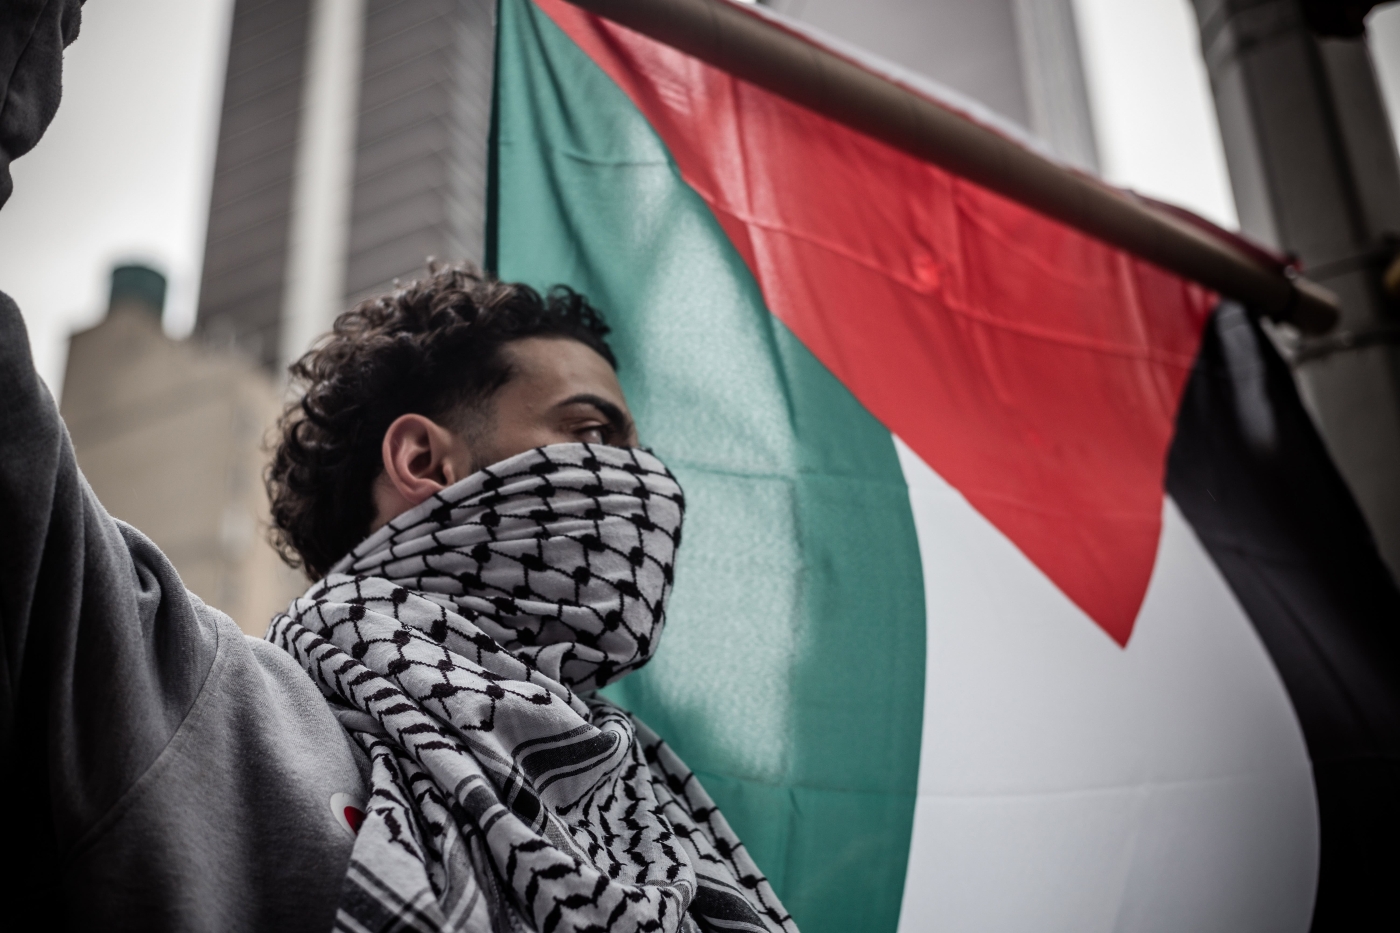 A demonstrator holds the Palestinian flag during a protest in New York city on 13 May 2022. (Reuters)